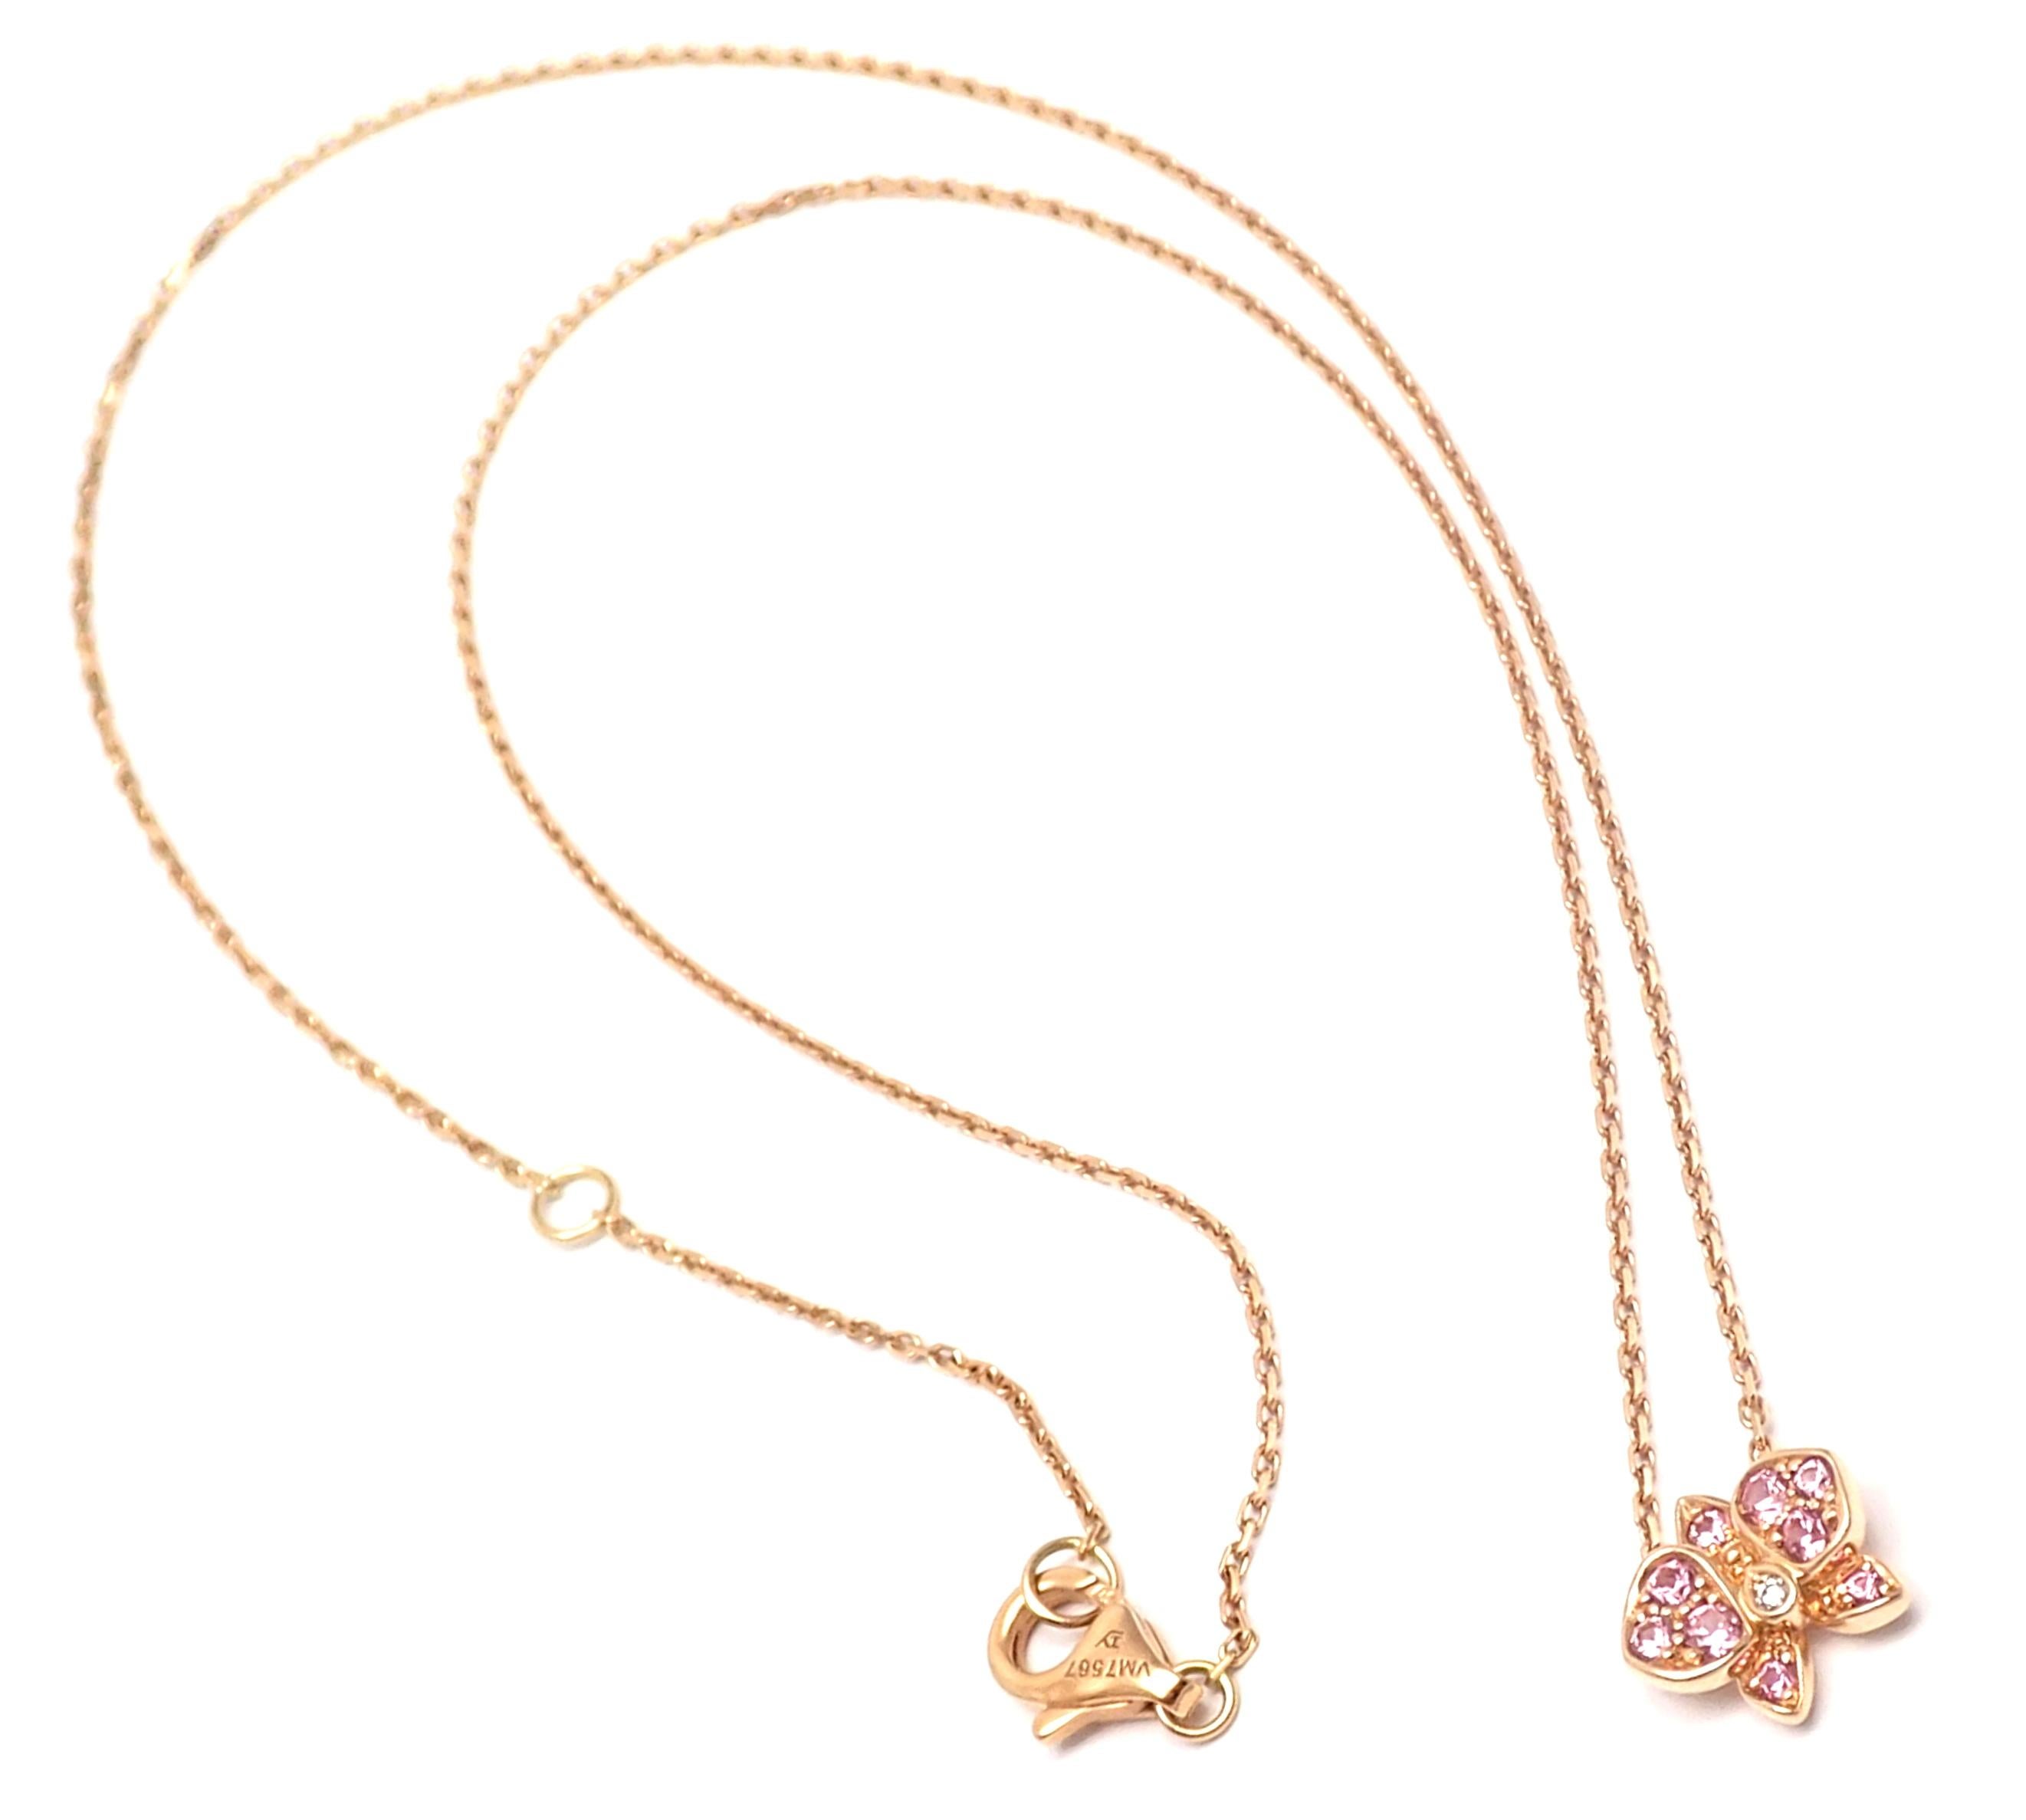 18k Rose Gold Caresse D'orchidées Orchid Flower Pink Sapphire And Diamond Pendant Necklace by Cartier.
With 1 round brilliant cut diamond
9 round pink sapphires
Details: 
Length: 16